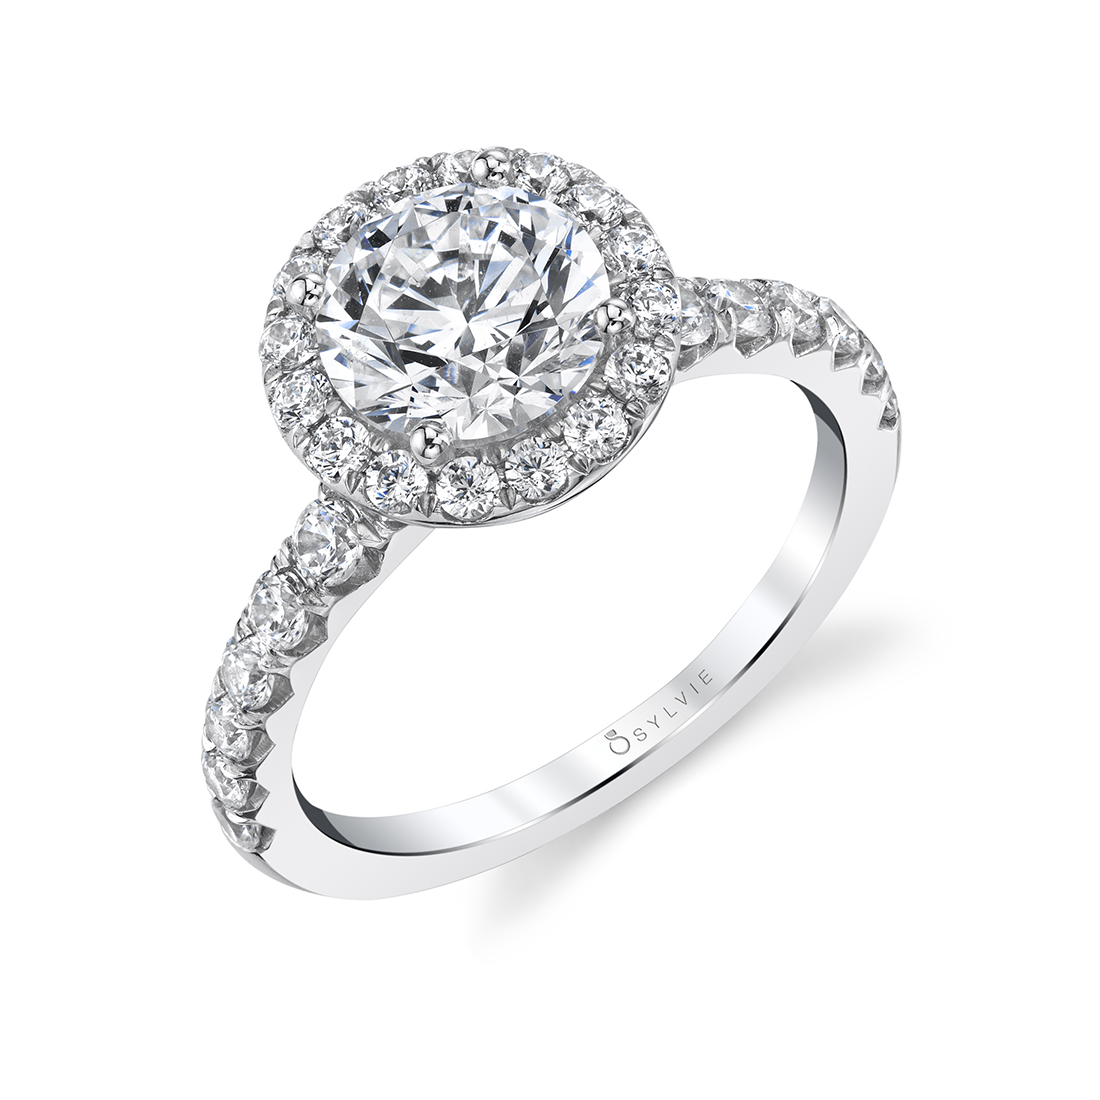 Profile Image of a Halo Round Engagement Ring in white gold 